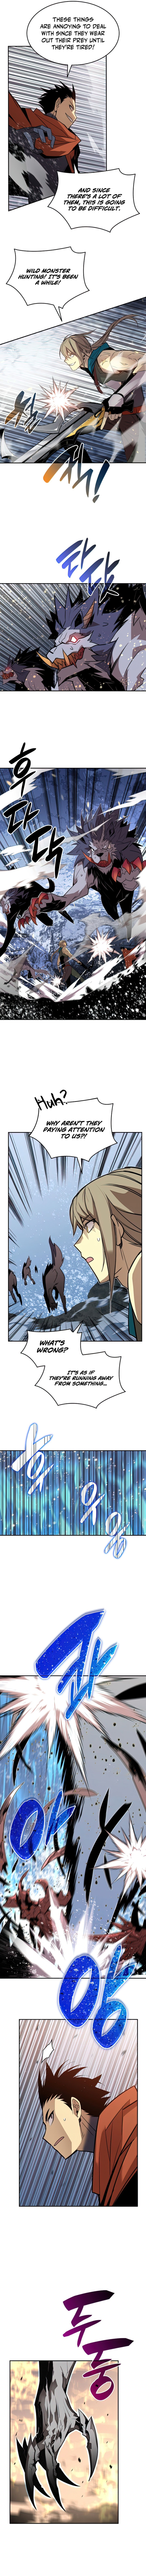 Worn and Torn Newbie - Chapter 128 Page 7